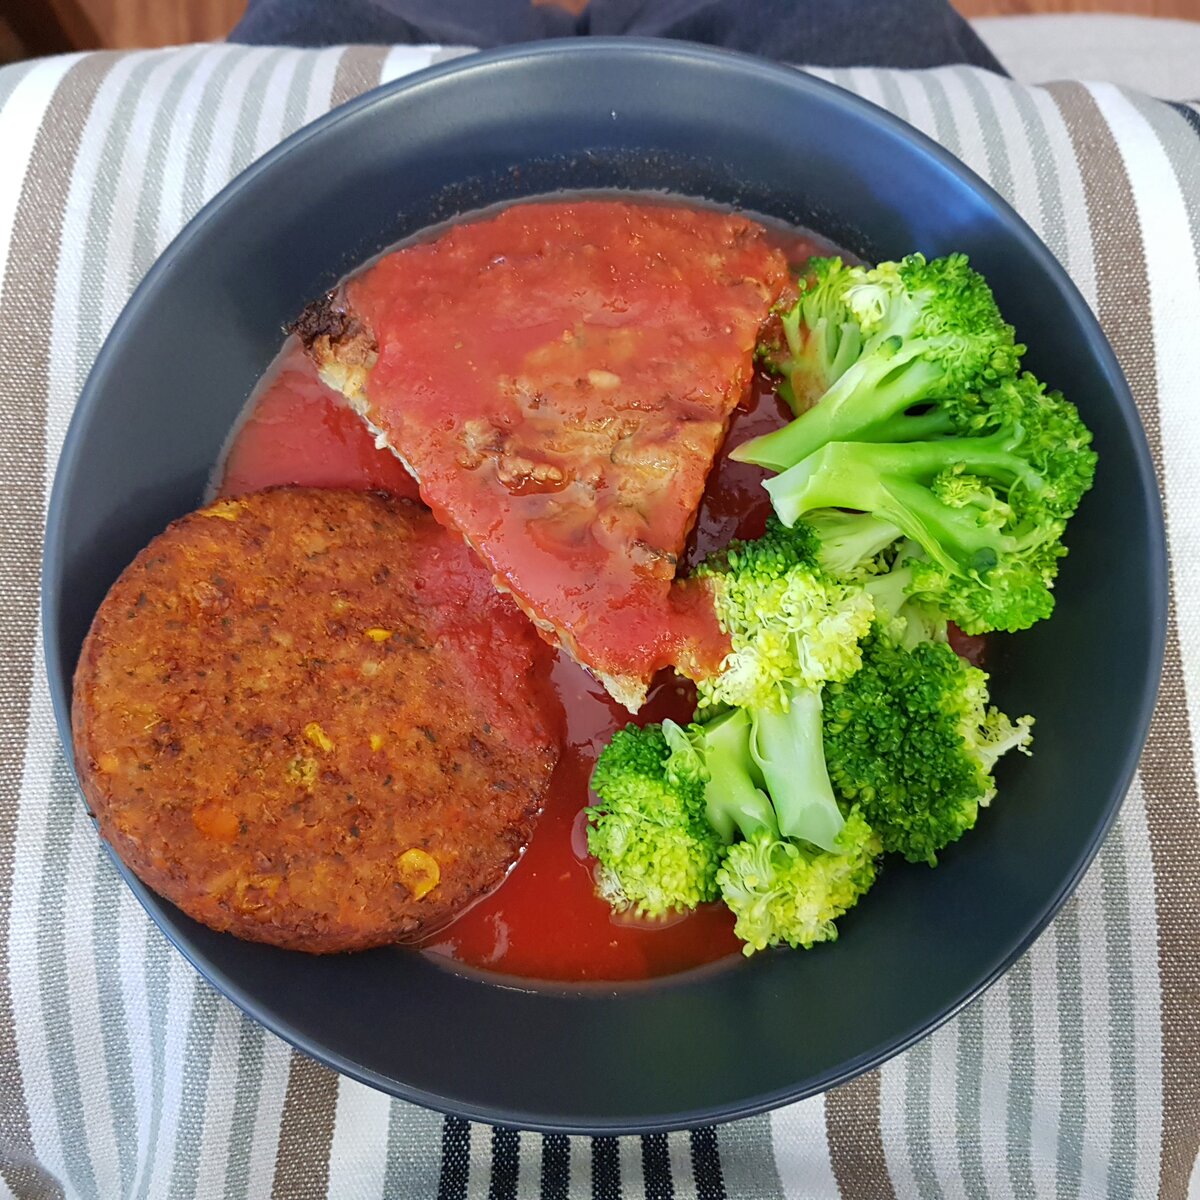 Courgette, Rosemary, Rice Cake with veggie burger & broccoli